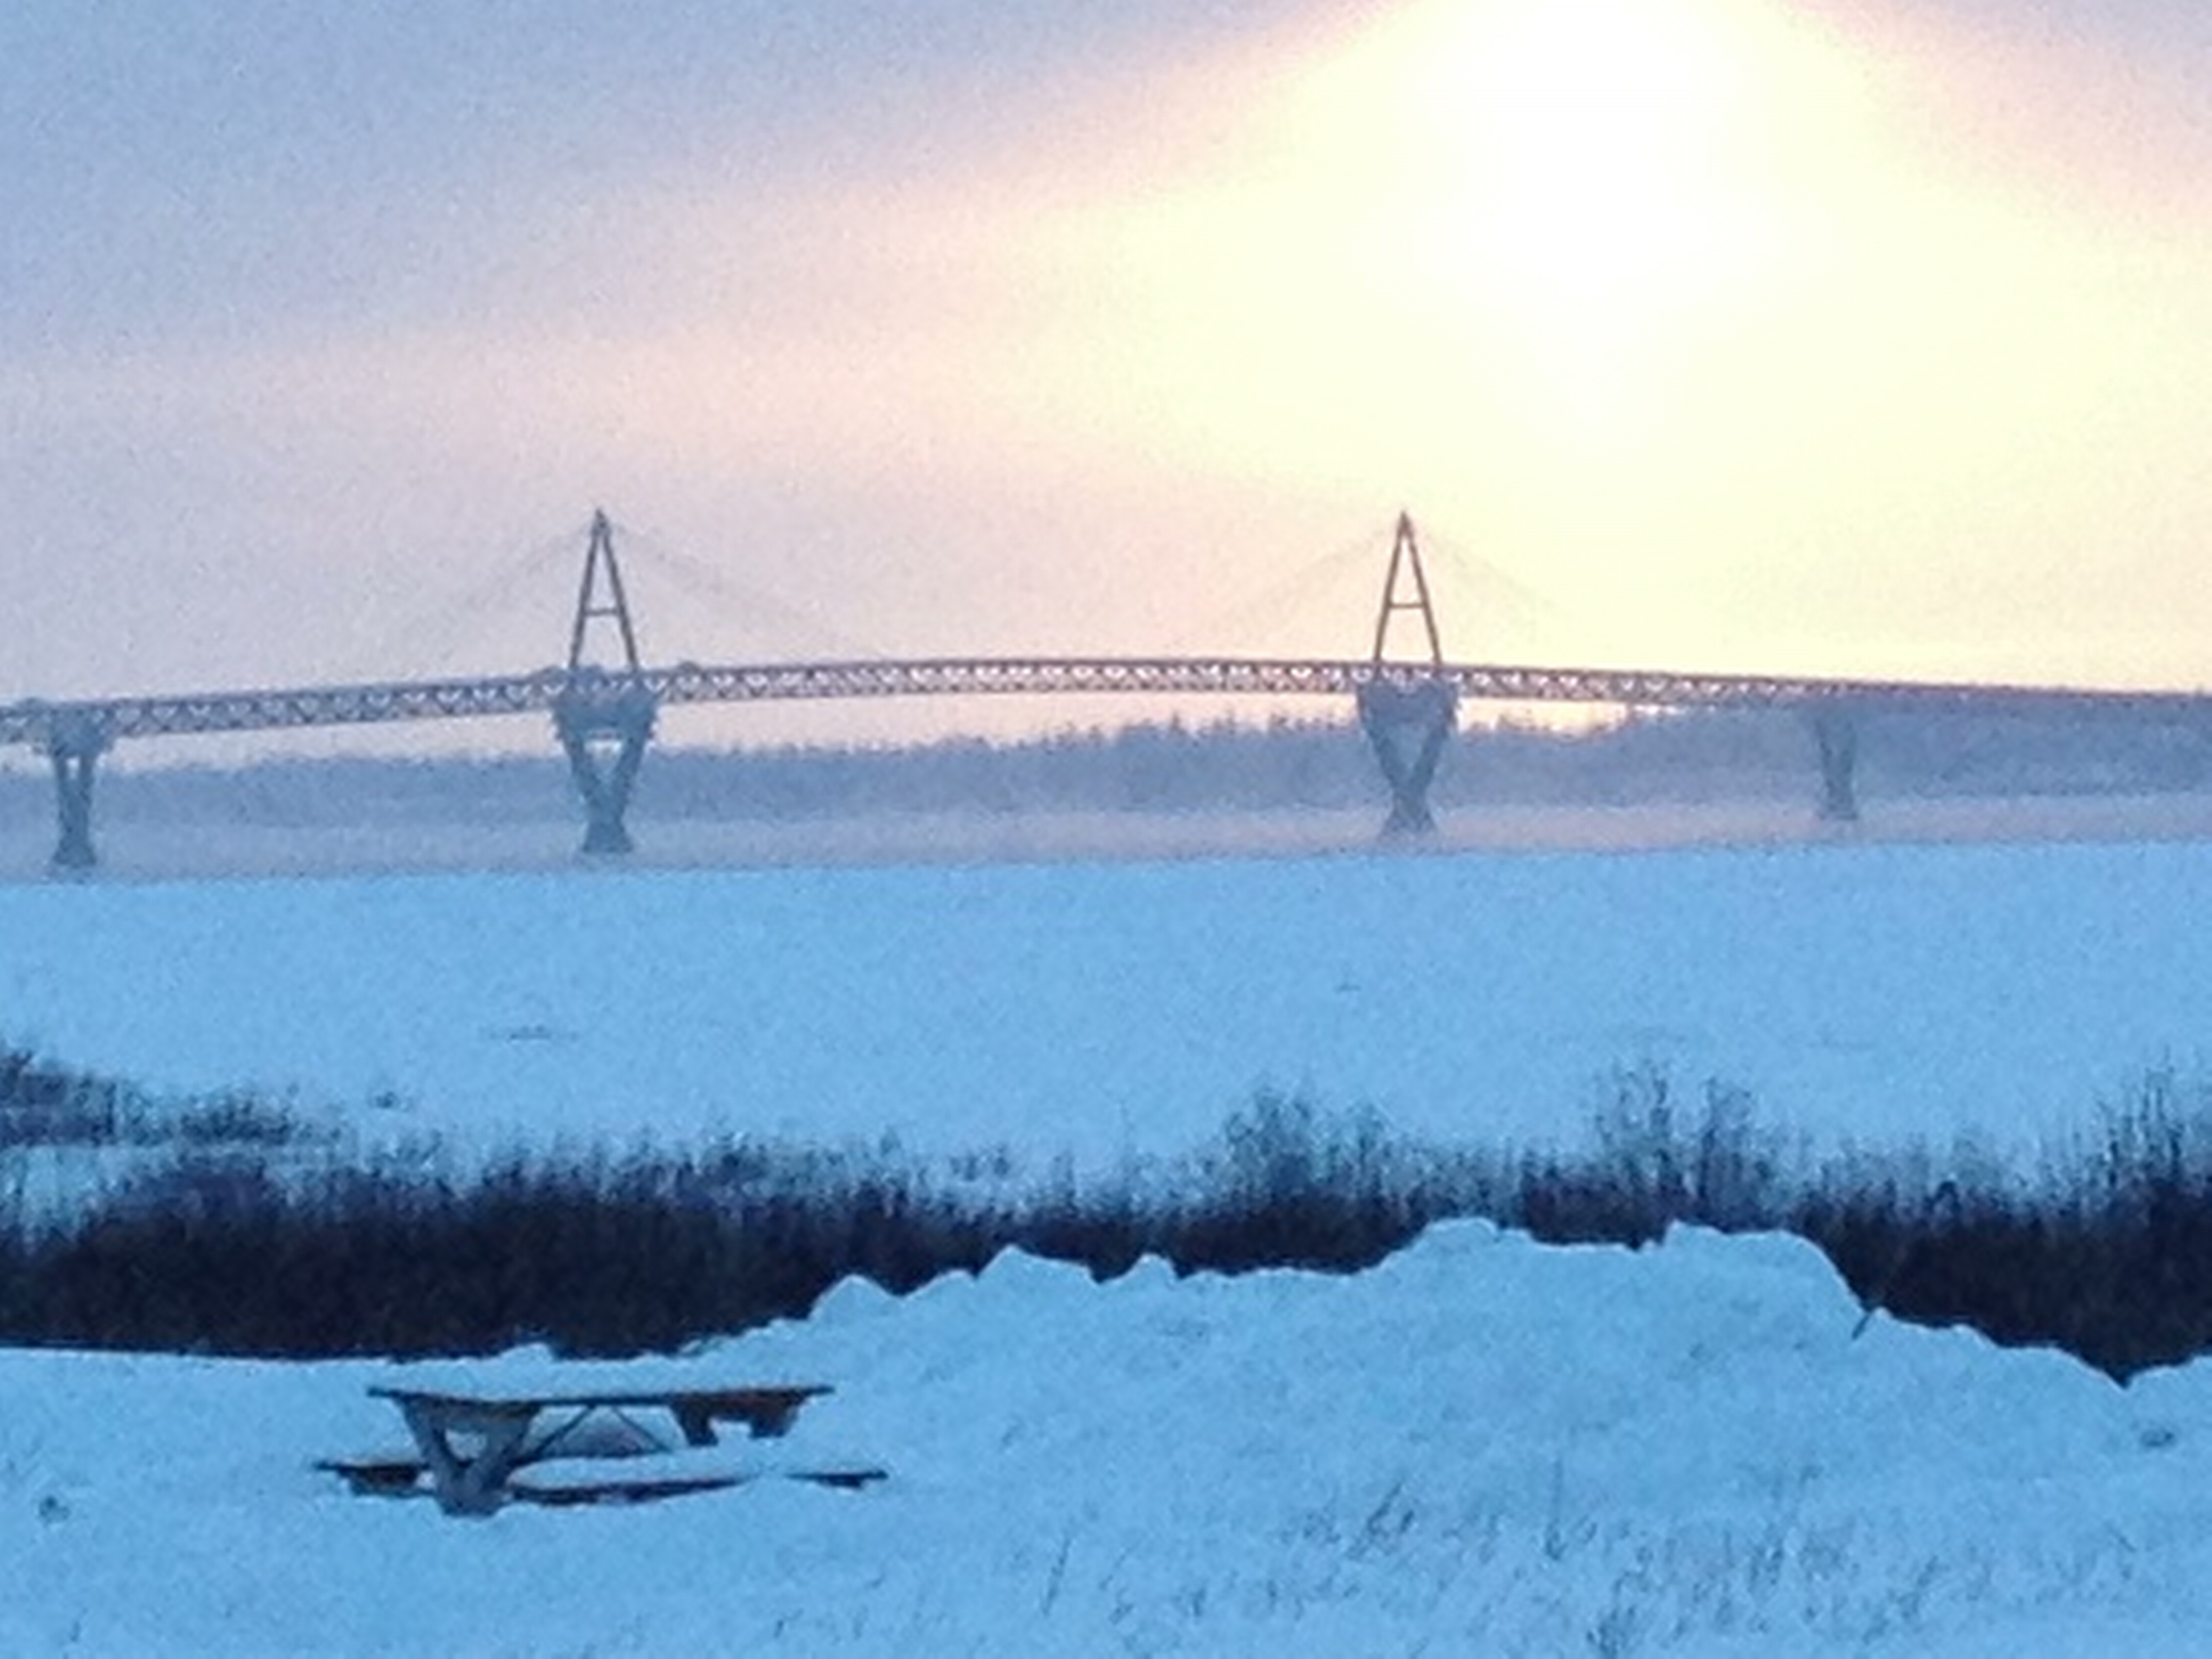 The recently opened Dehcho Bridge in Ft Providence NWT